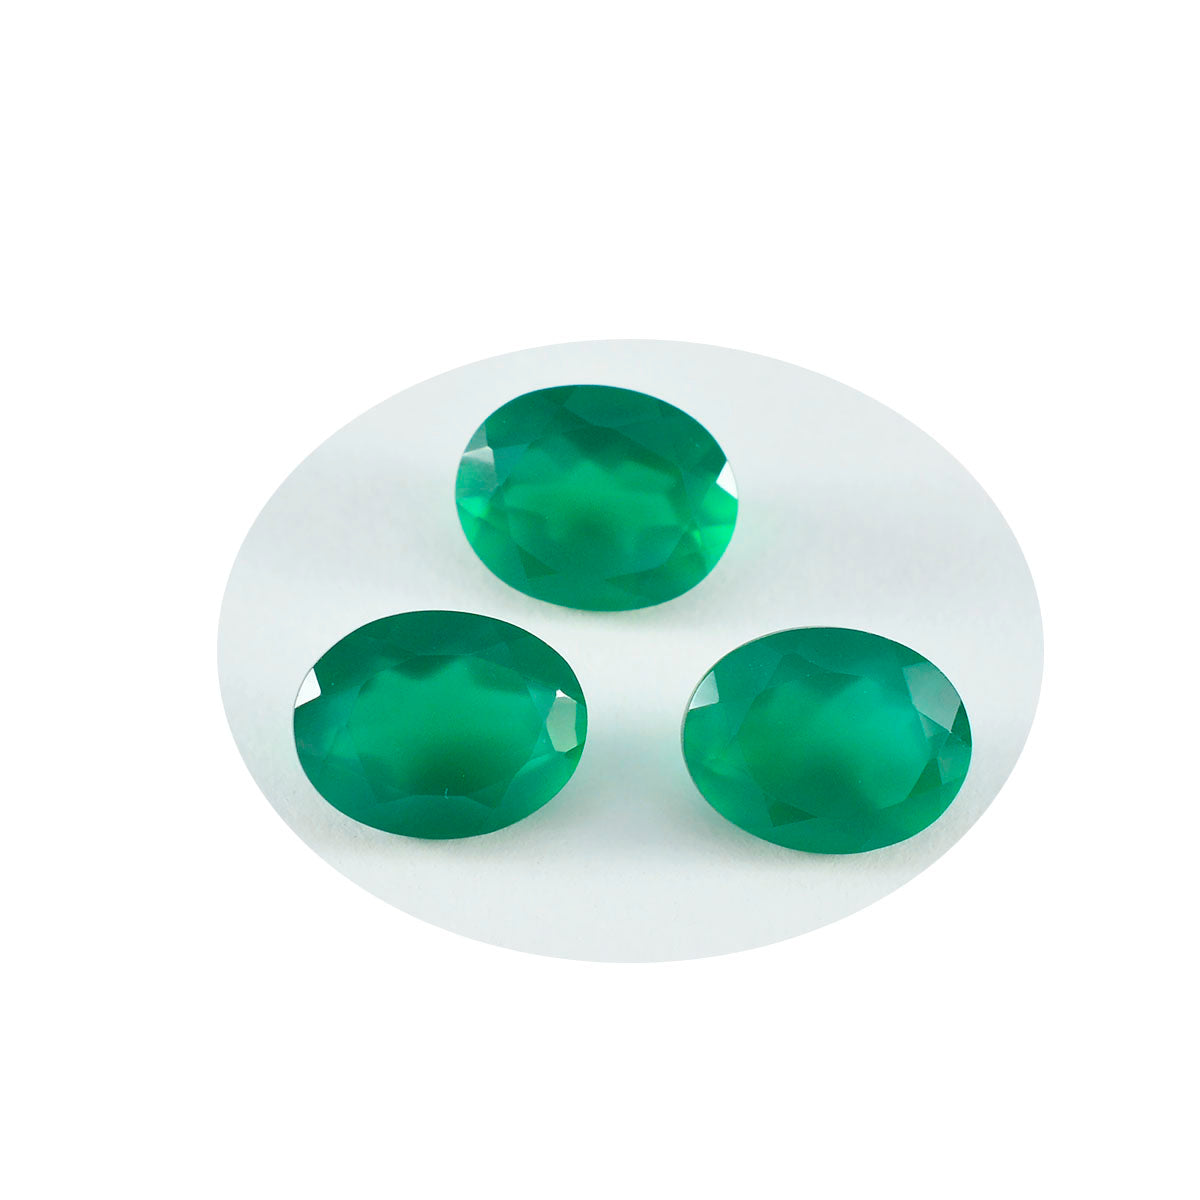 Riyogems 1PC Natural Green Onyx Faceted 8x10 mm Oval Shape great Quality Gems